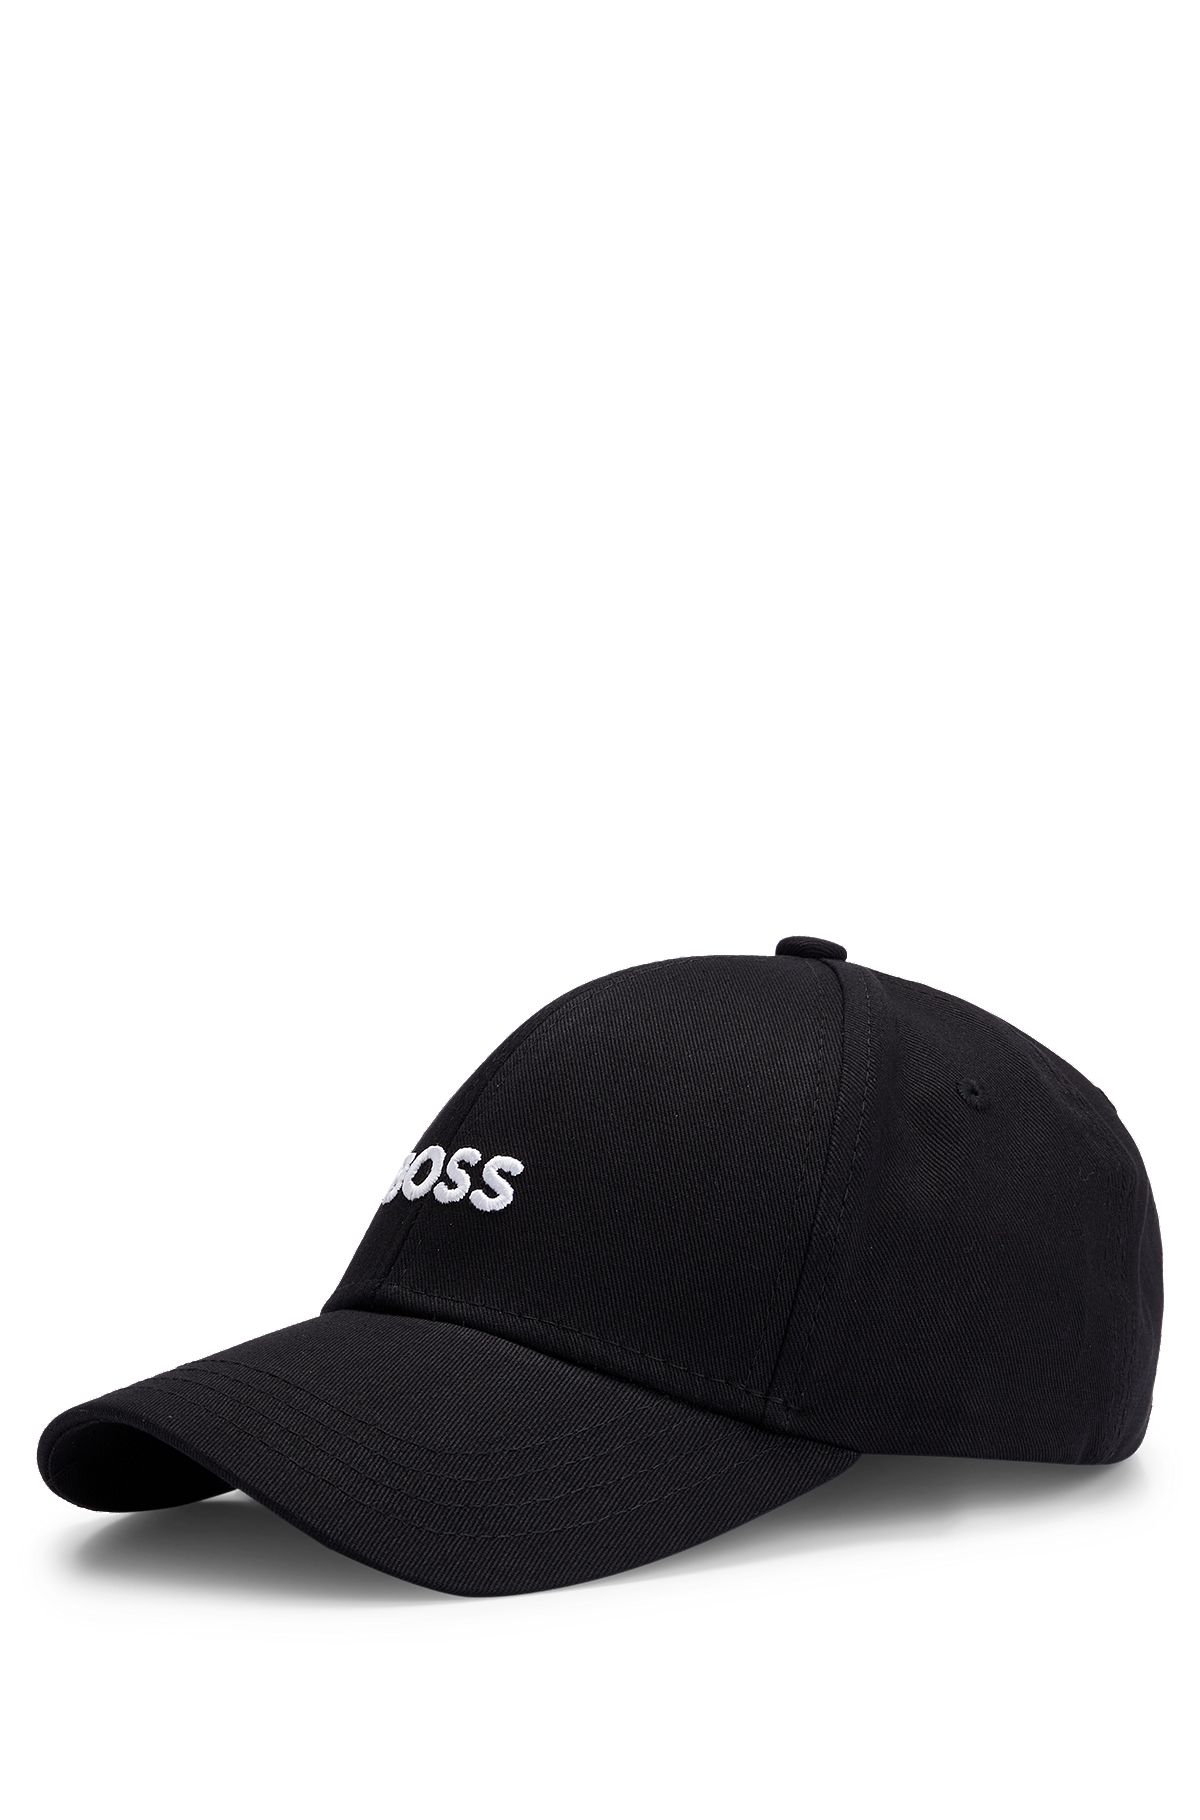 Cotton-twill six-panel cap with embroidered logo, Black